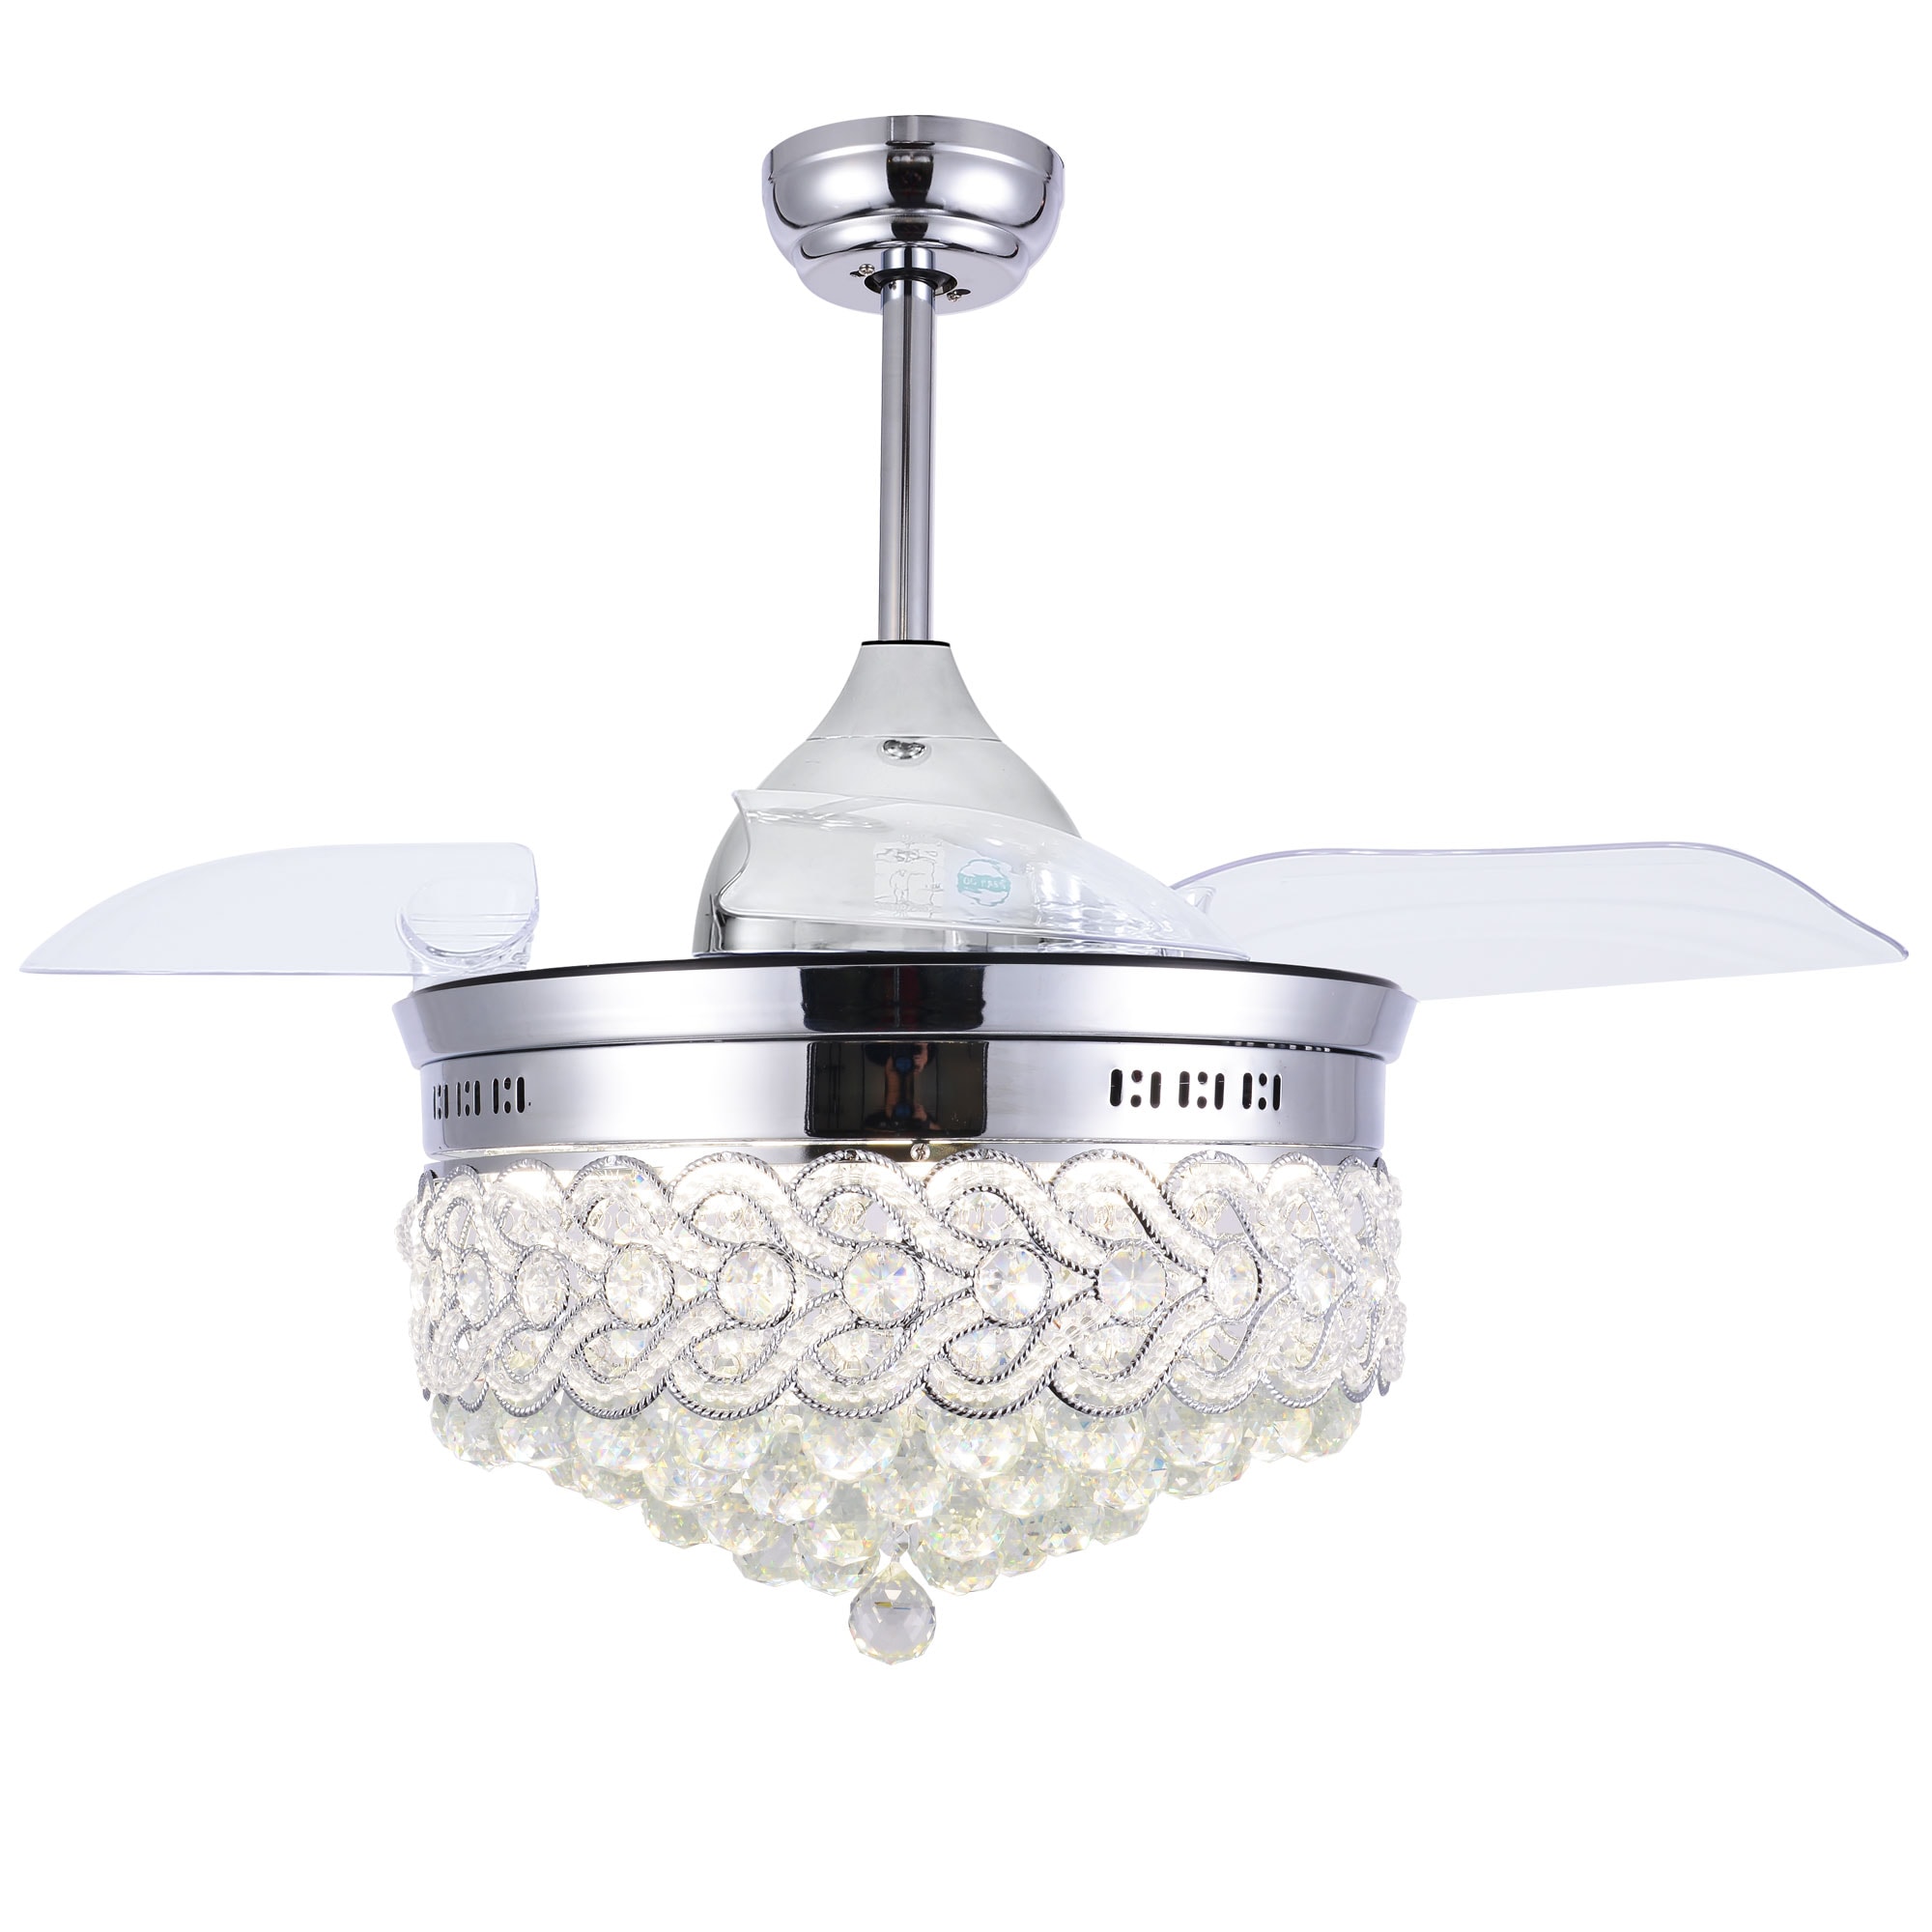 42'' Chandelier Ceiling Fan w/ Light LED Remote Control Dimmable 3 color 3 speed